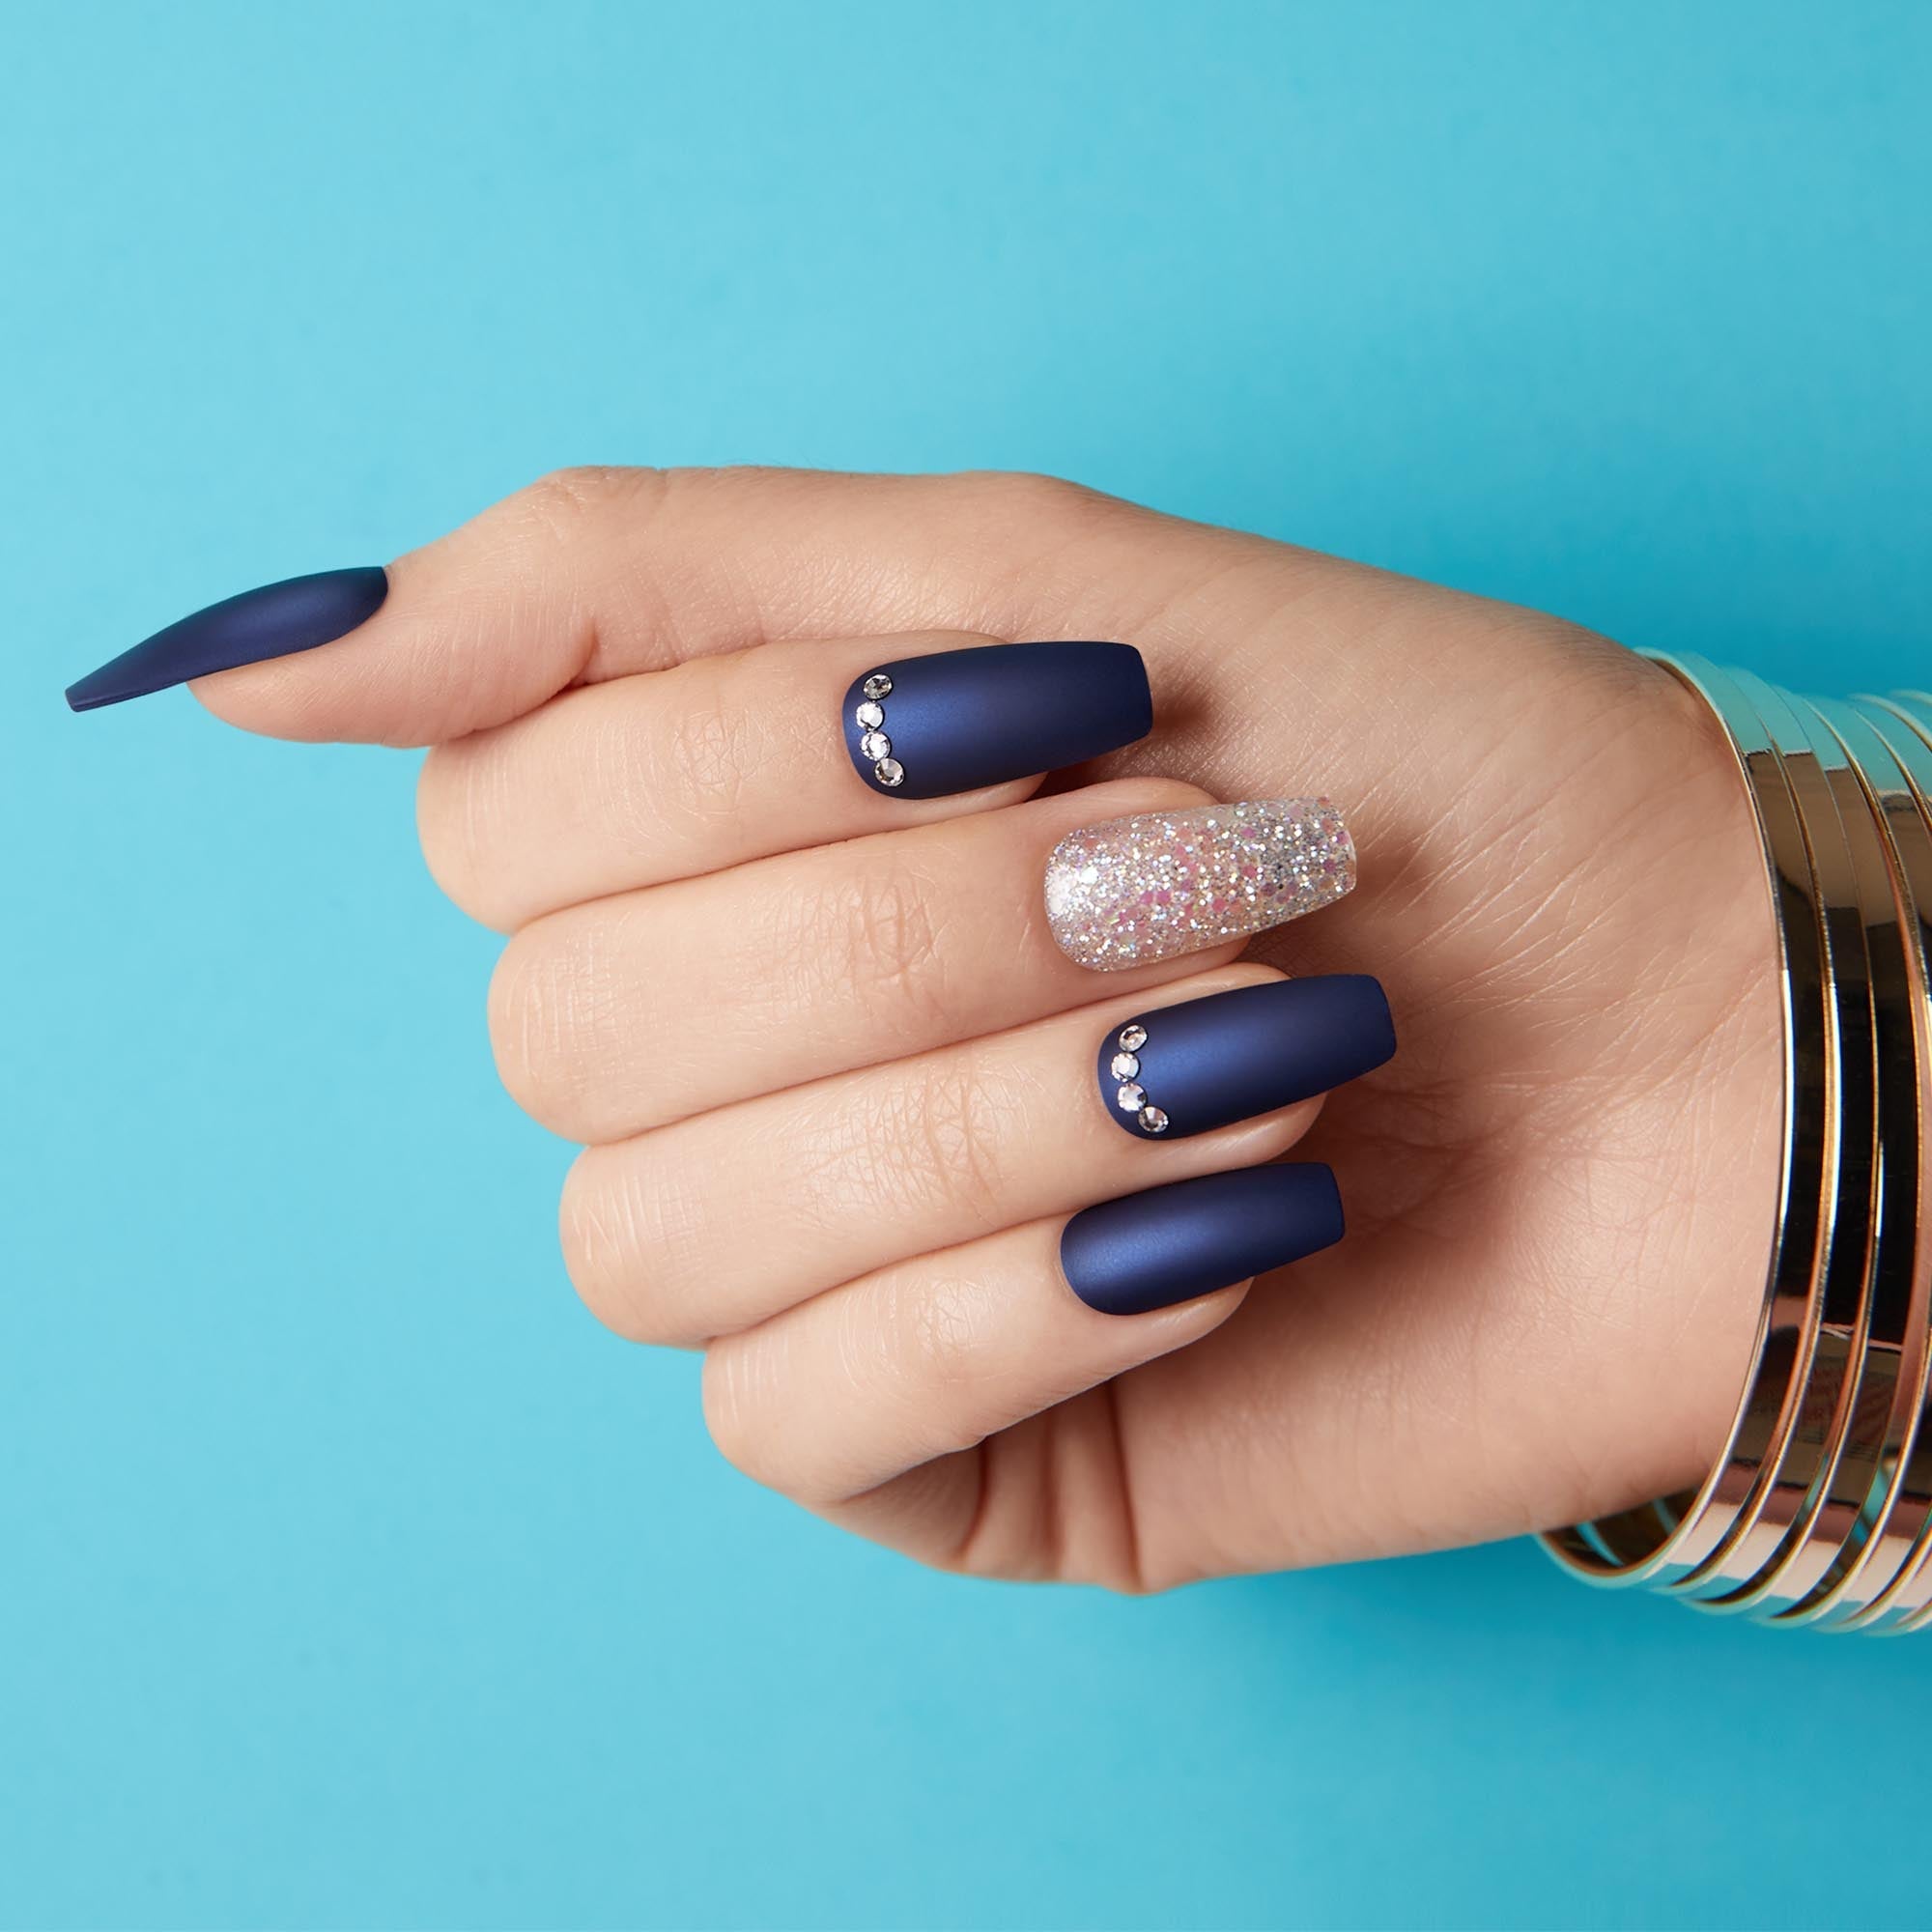 27 Matte Nail Ideas to Level Up Your Manicure  Squoval acrylic nails,  Matte black nails, Matte nails